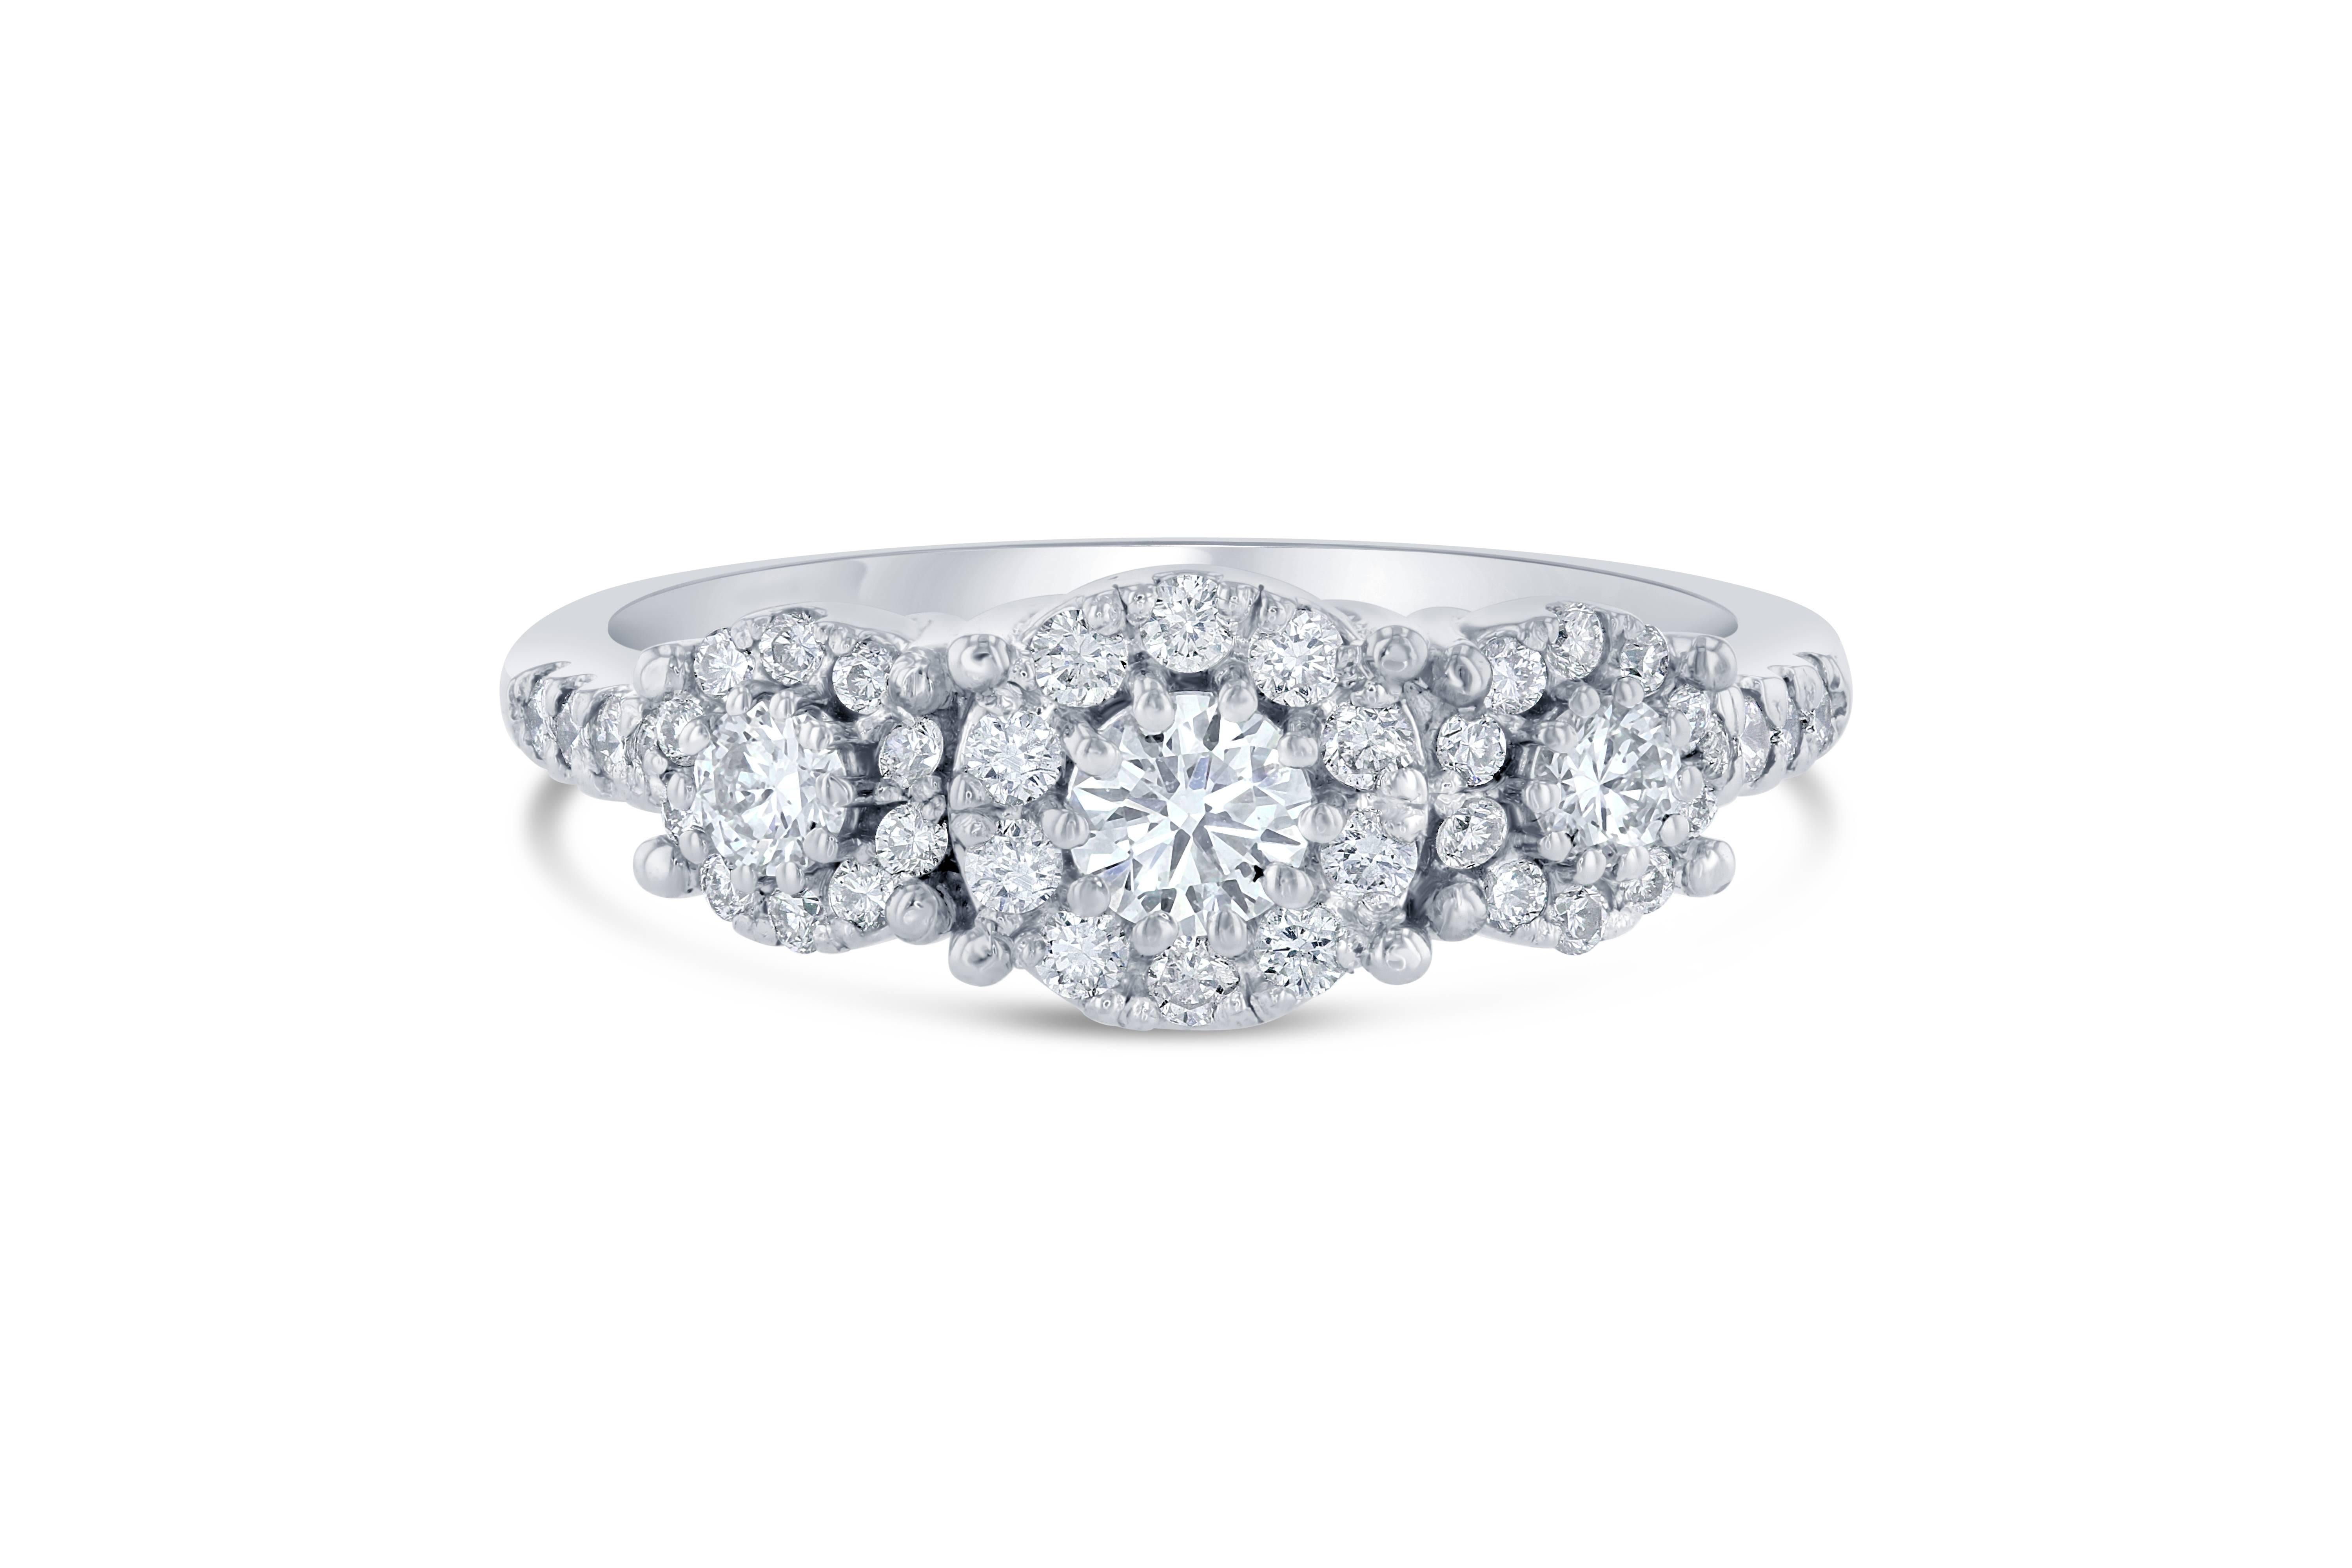 A beautiful round cut diamond three stone ring set in a round invisible setting creating a larger look for the entire ring!

There are 41 Round Cut Diamonds that weigh 0.68 Carats and includes the three center diamonds and the surrounding diamonds